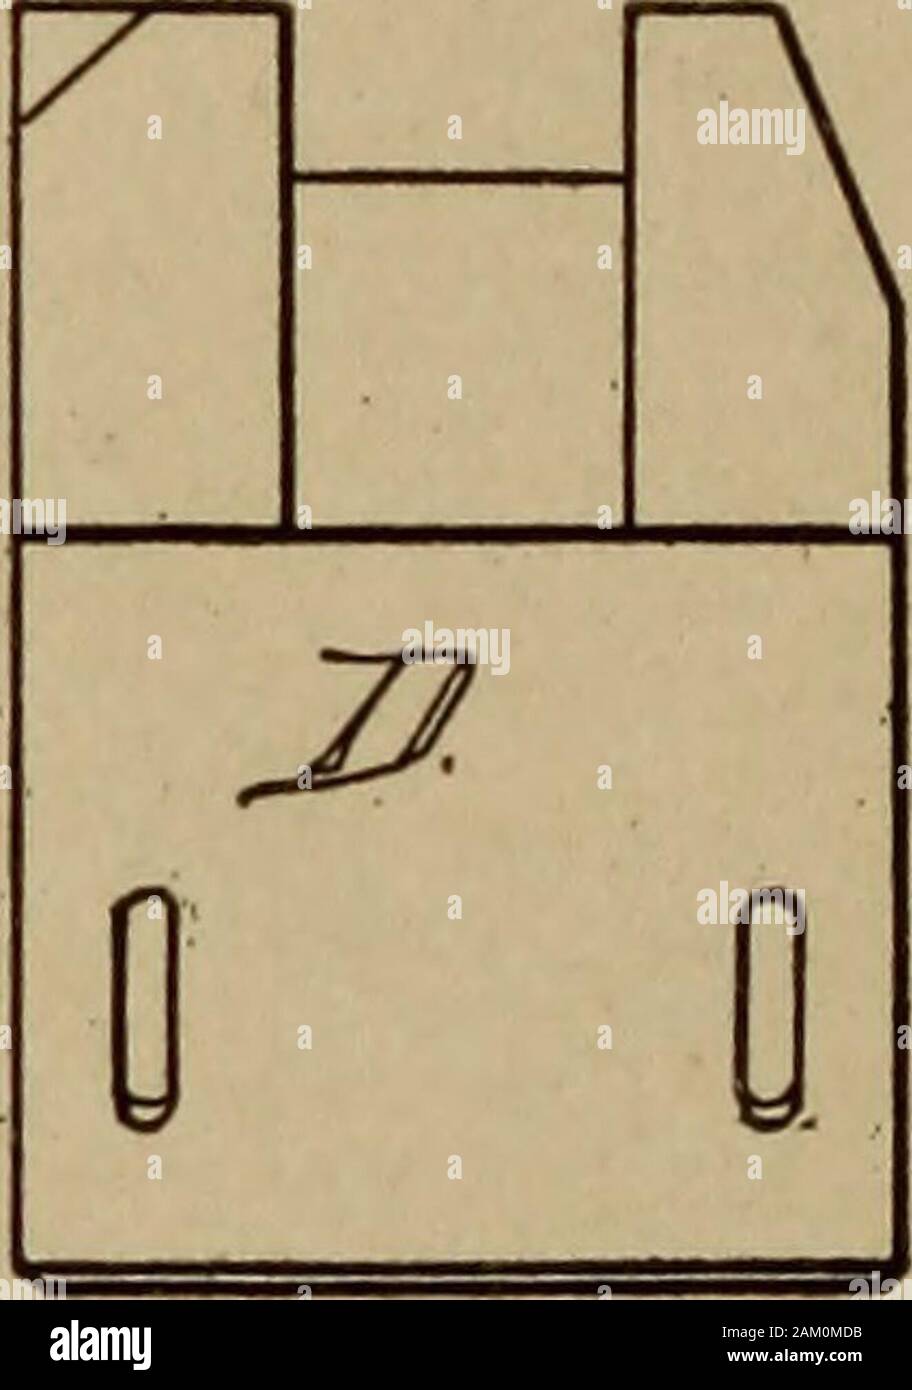 Handy man's workshop and laboratory . Fig* 31—Construction of frame The tail-stock, E, is J1/* inches wide, to suit the width of thelathe-bed. The guide, a, is 1 inch thick by jy2 inches long. It issecured to the stock with screws, allowance being made forenabling the stock to slide, as stated above. It is 4 incheswide, there being but one wedge. The full height, including thetongue, which is the same as that of the head-stock, is 13 inches.The location of the plates, g, referred to elsewhere, will dependupon the size of the bearings, /, shown in detail in Fig. 34. The tool rest and clamp F, G Stock Photo